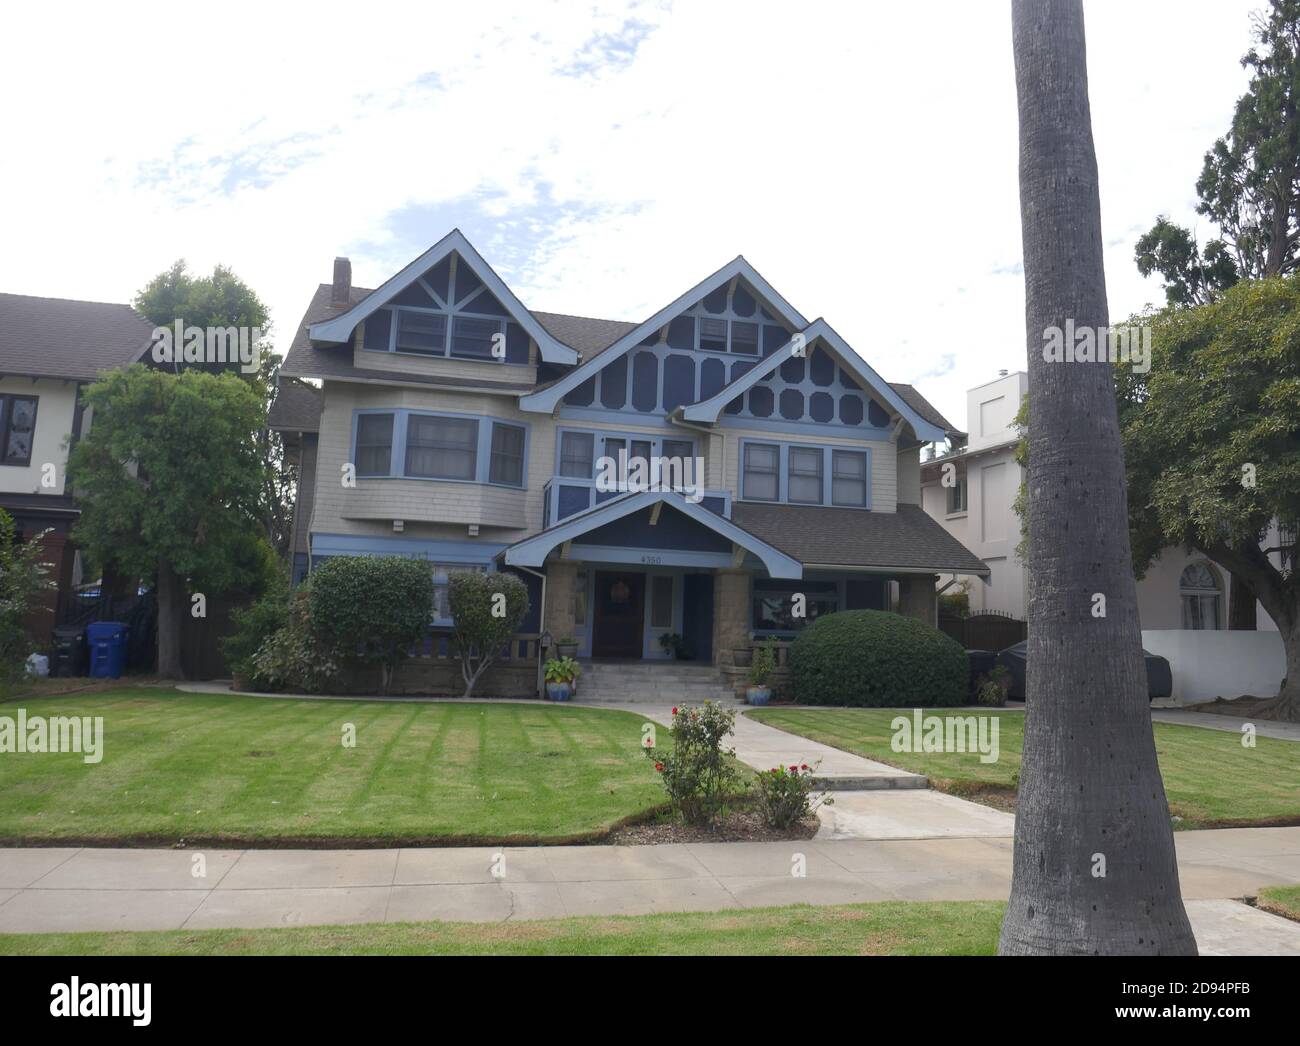 Los Angeles, California, USA 1st November 2020 A general view of atmosphere of Insidious House Filming Location at 4350 Victoria Park Drive on November 1, 2020 in Los Angeles, California, USA. Photo by Barry King/Alamy Stock Photo Stock Photo